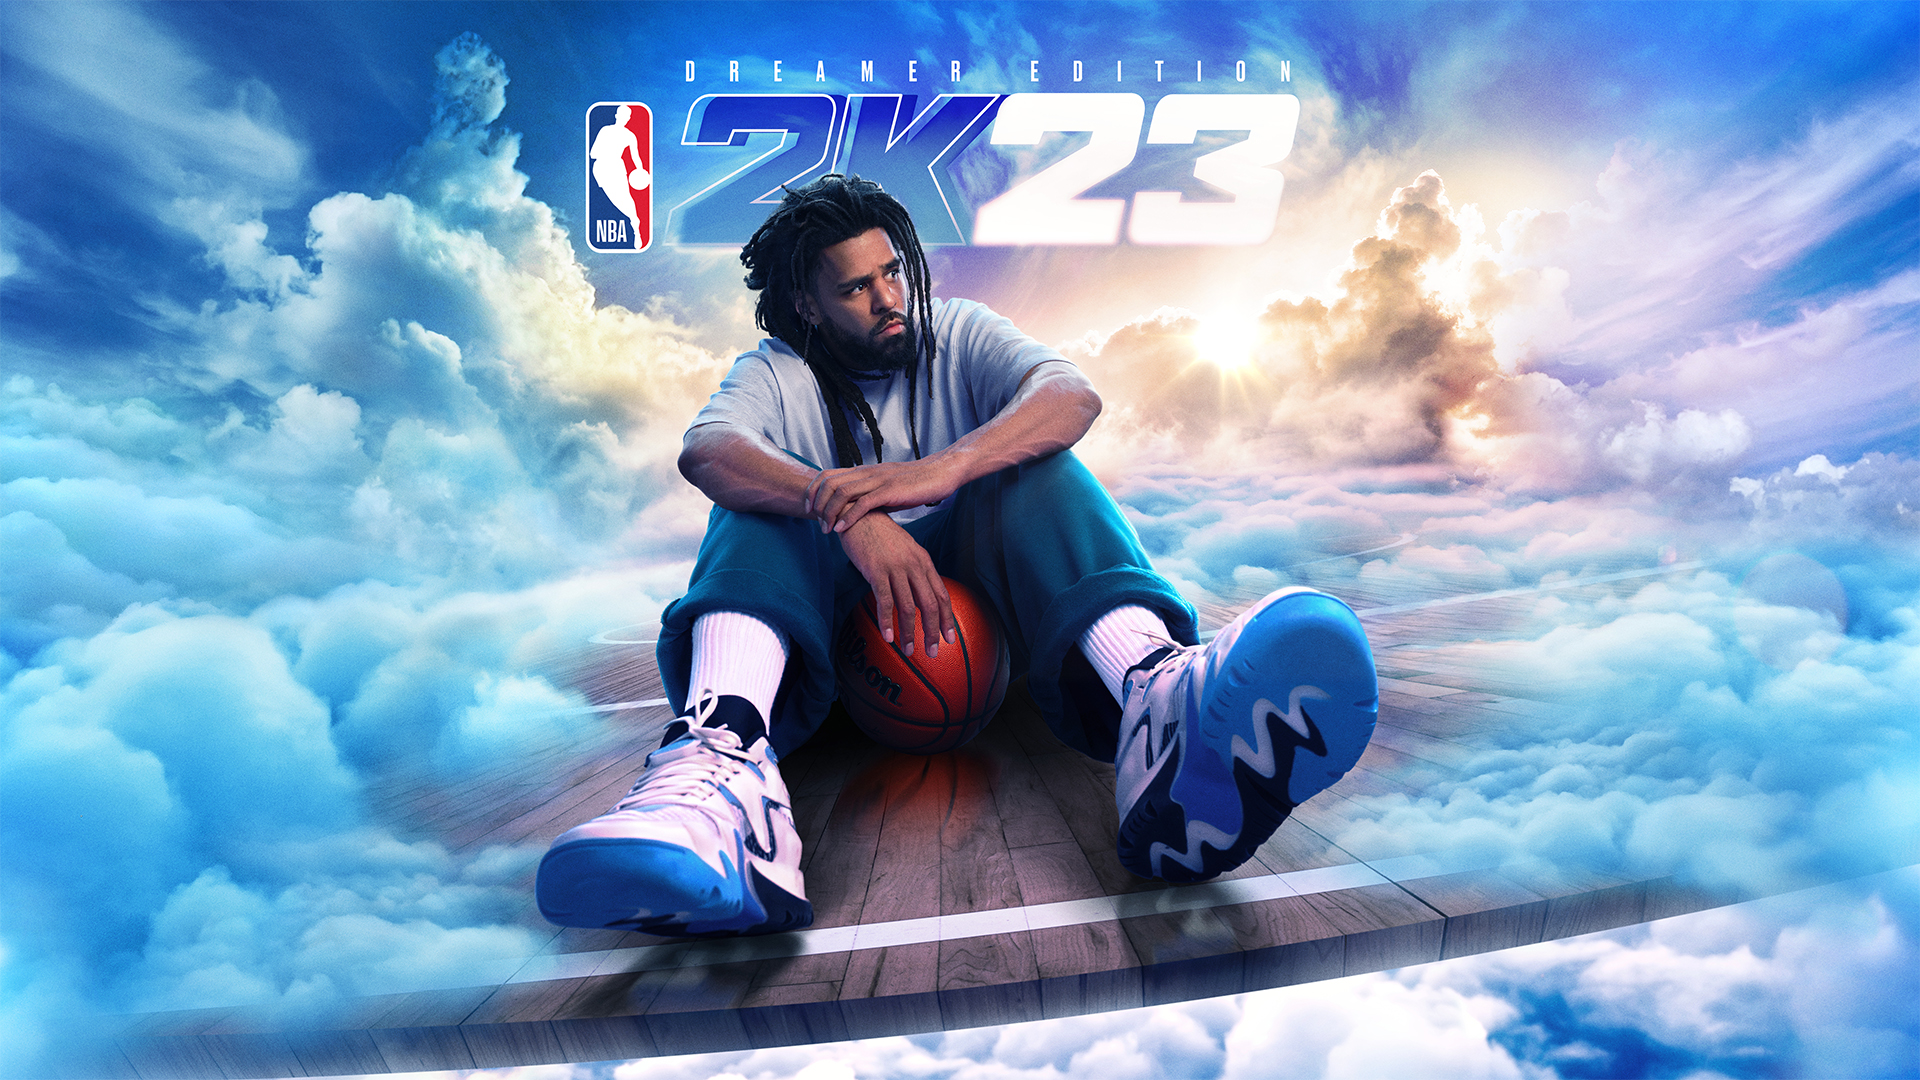 NBA 2K23 Dreamer Edition Features J. Cole On The Cover